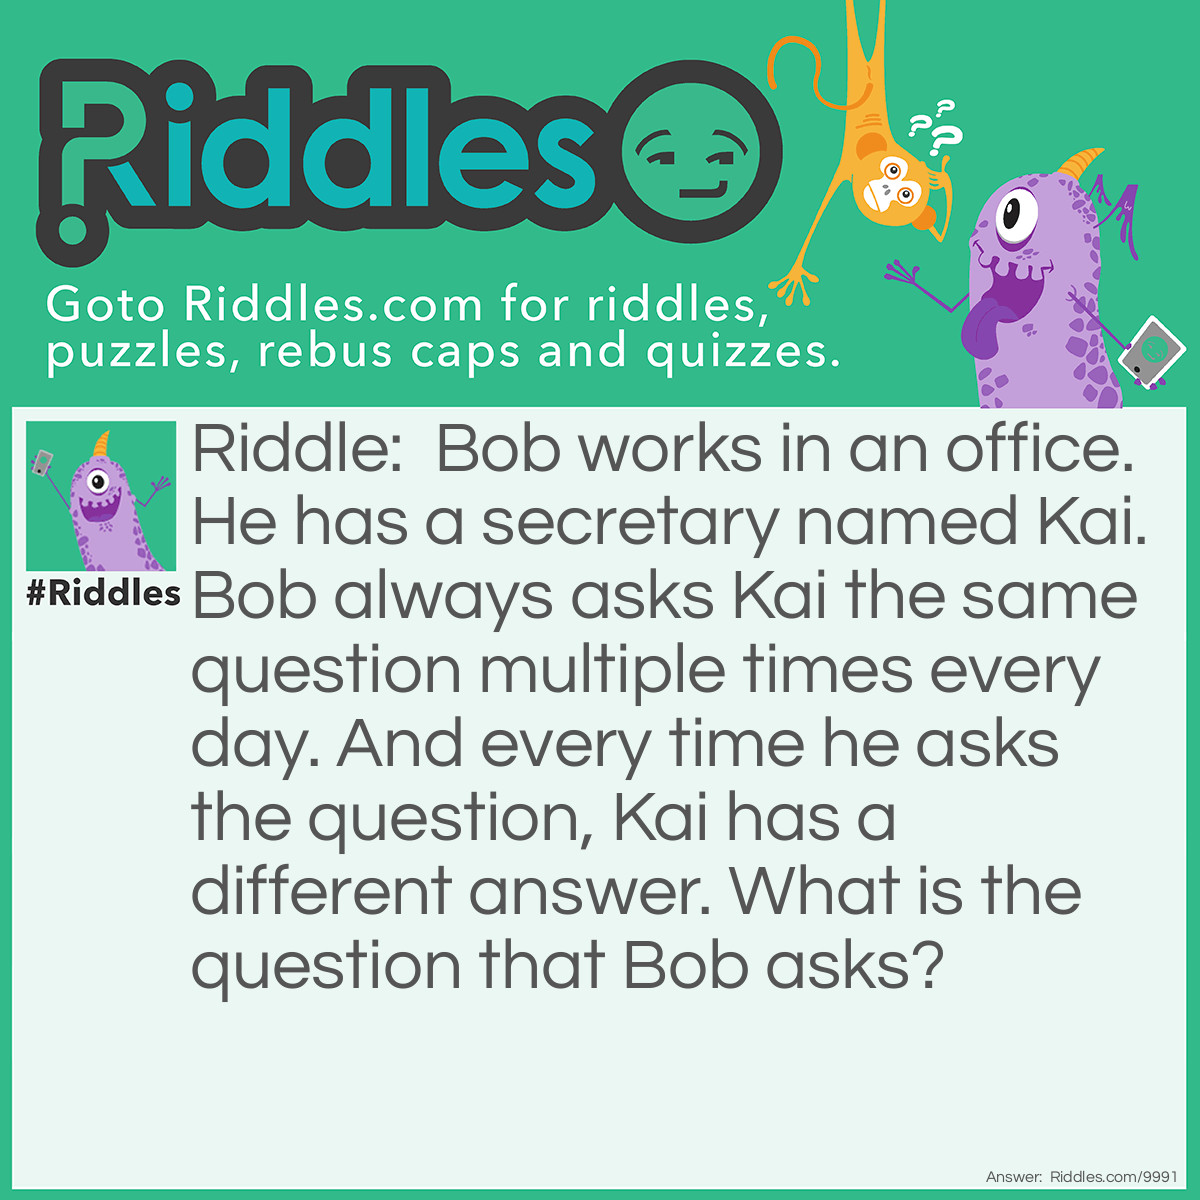 Riddle: Bob works in an office. He has a secretary named Kai. Bob always asks Kai the same question multiple times every day. And every time he asks the question, Kai has a different answer. What is the question that Bob asks? Answer: Answer: "What time is it?"